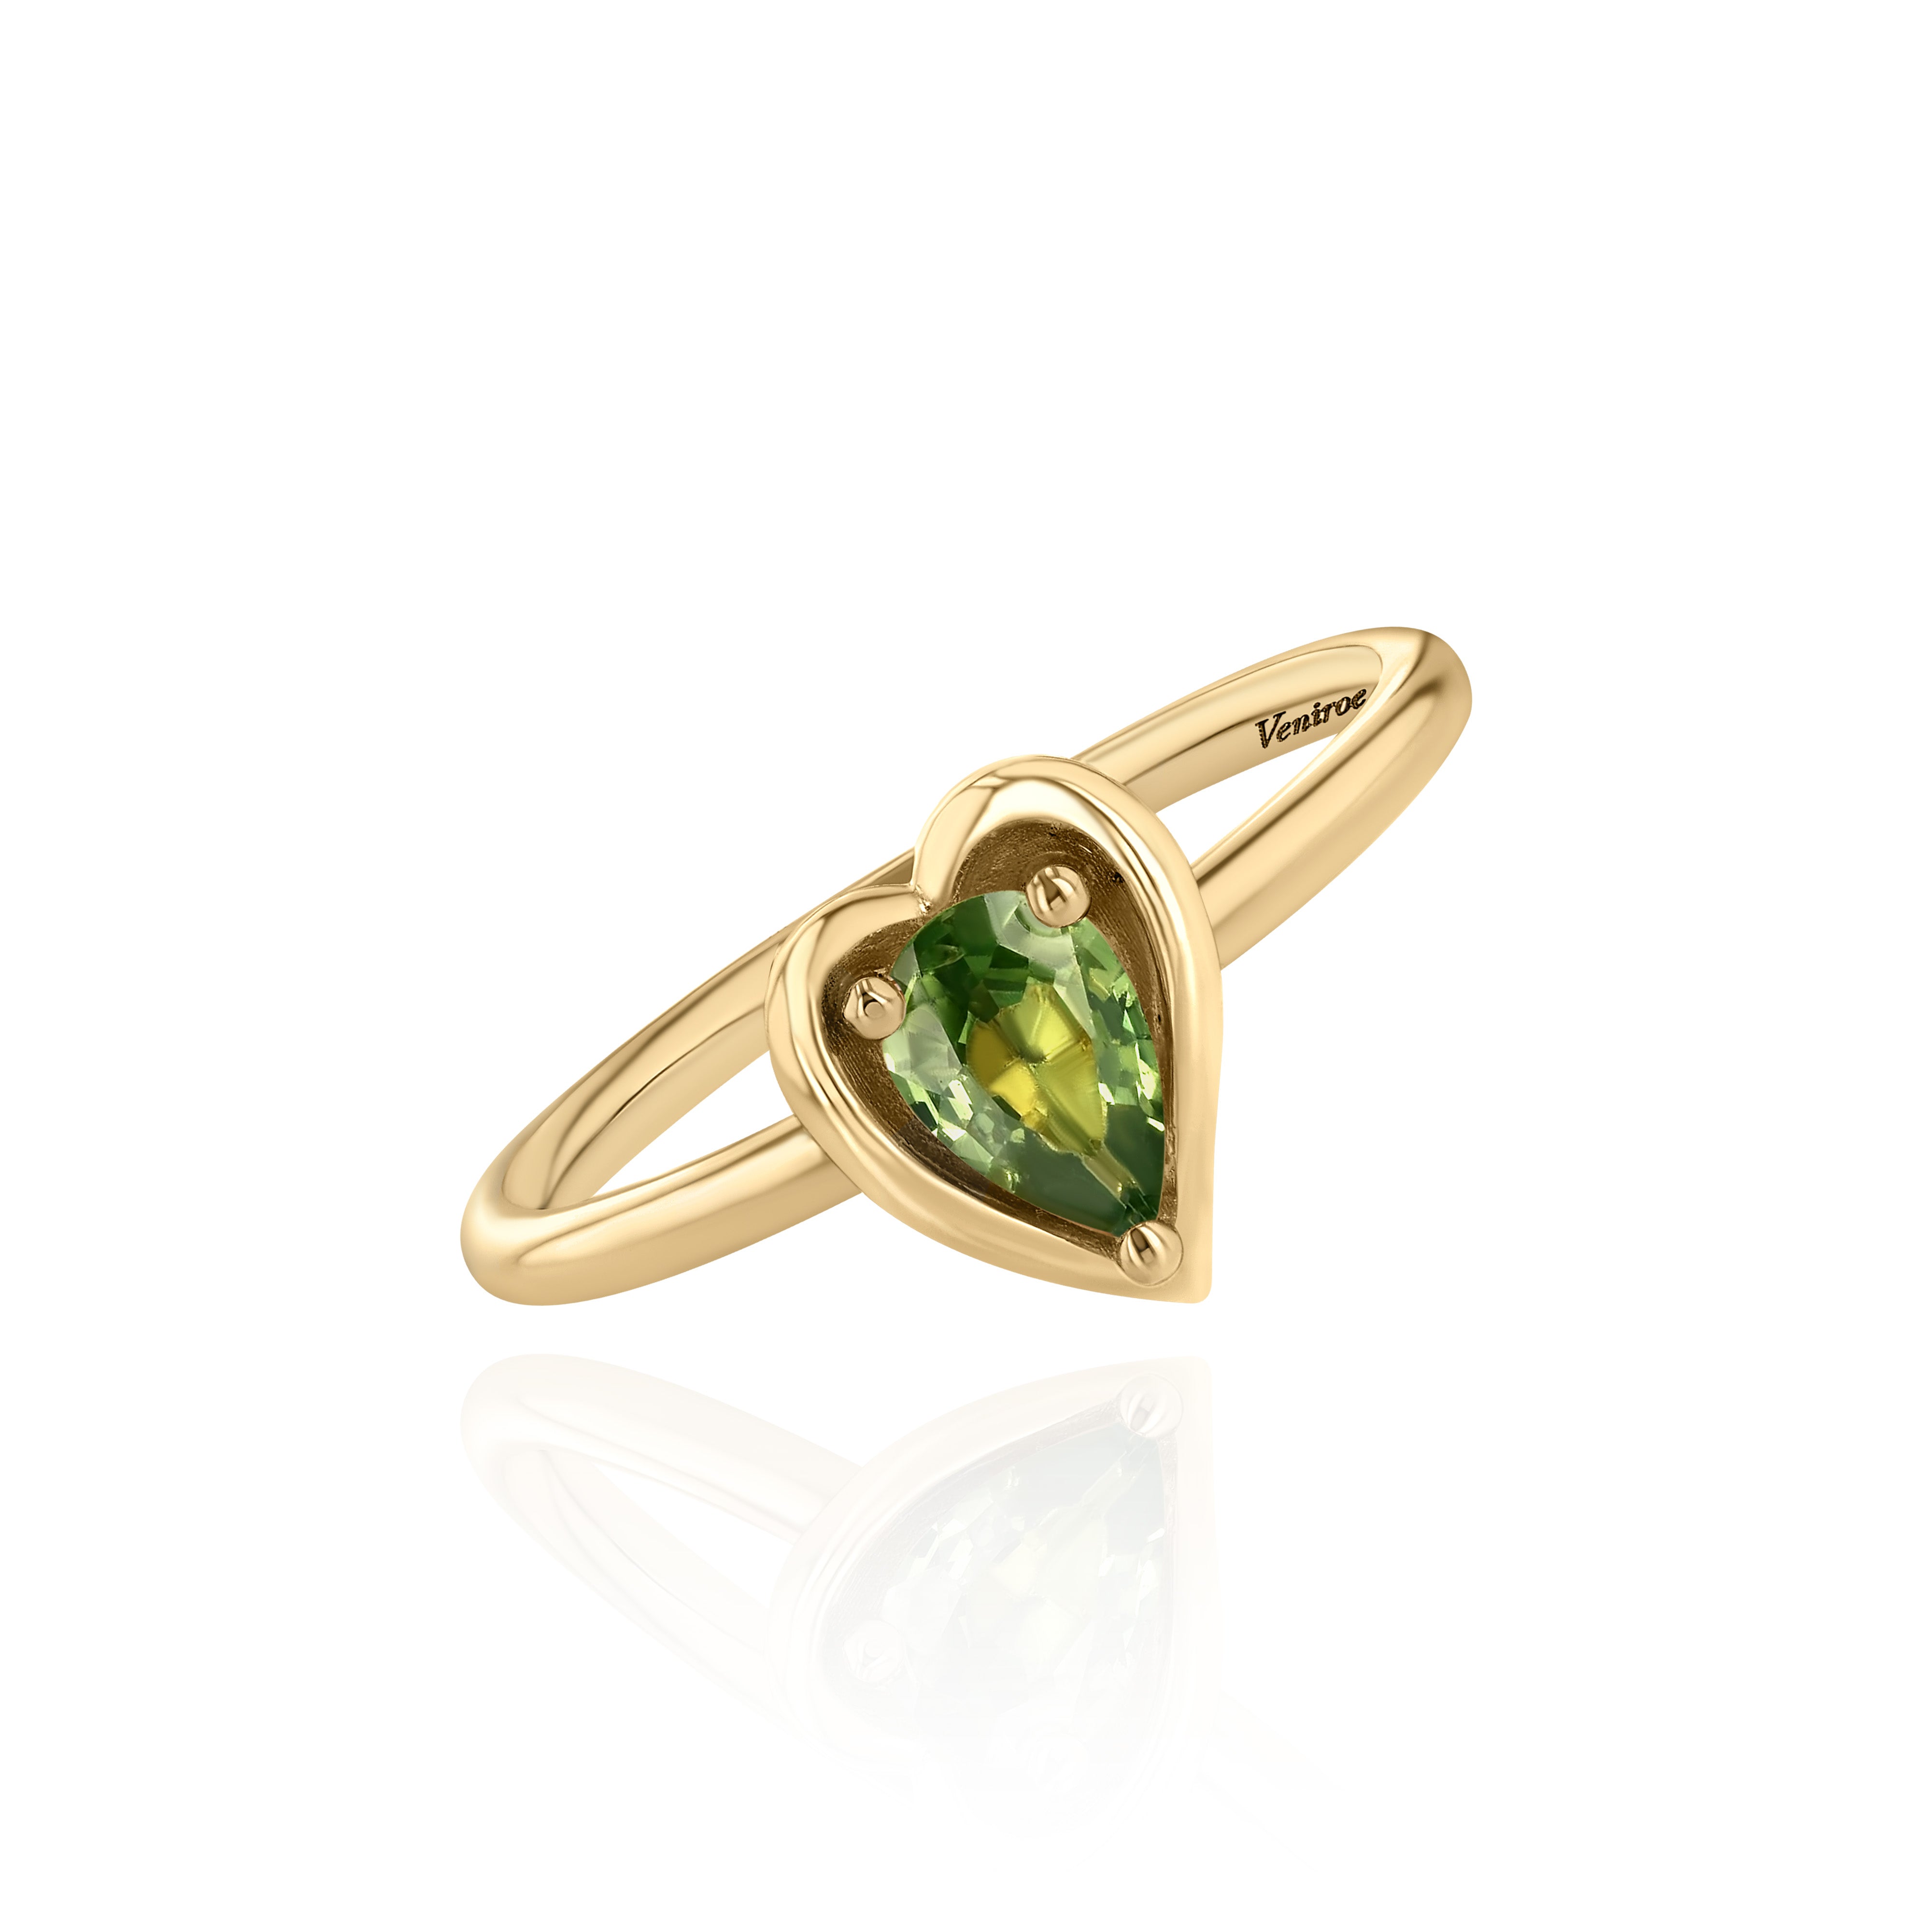 Yellow Gold heart shaped ring with a pear shaped Green Sapphire, Small